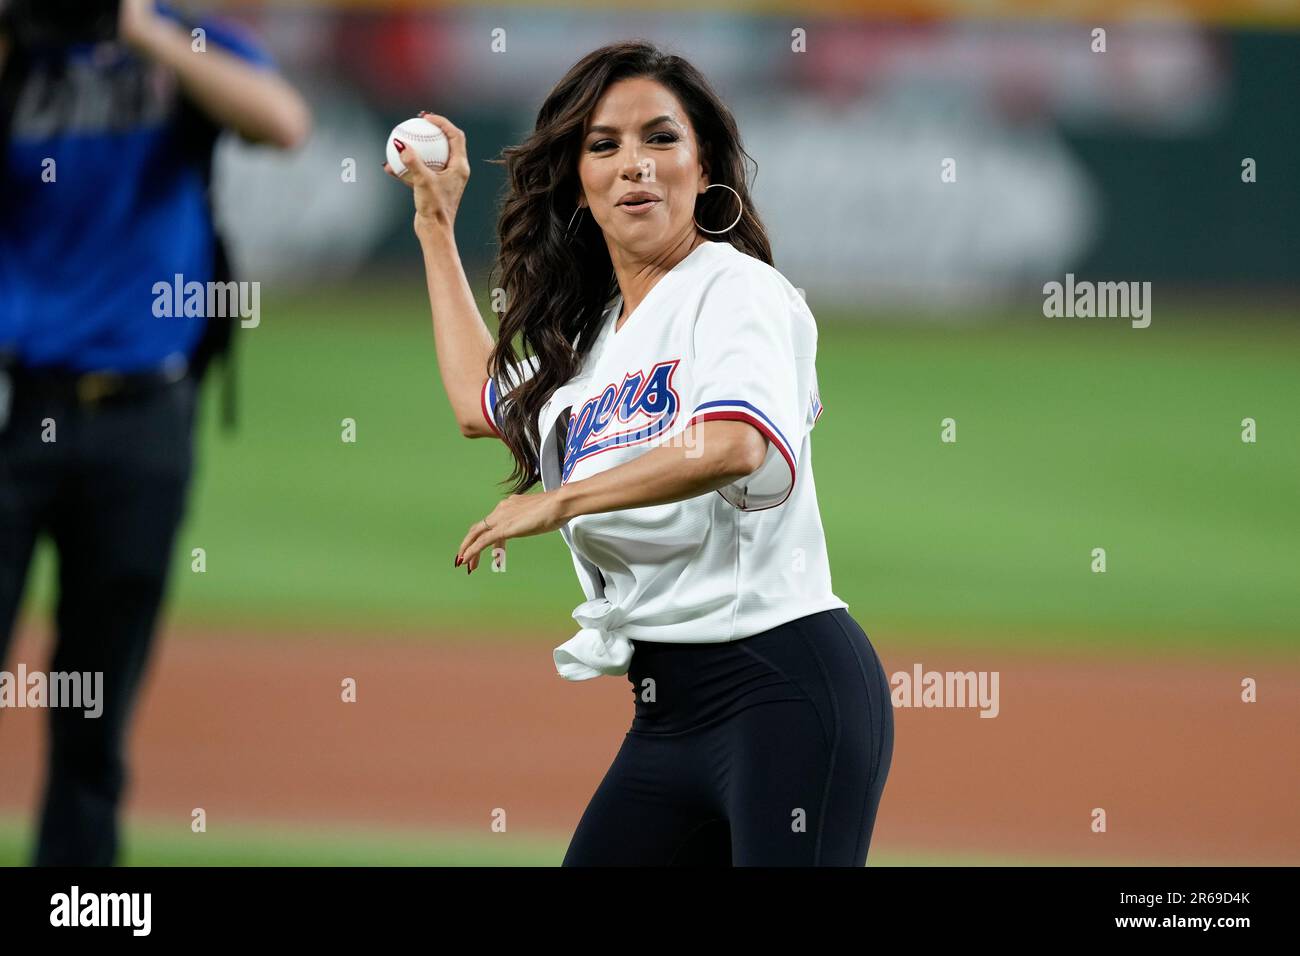 Actress Eva Longoria throws out the first pitch 